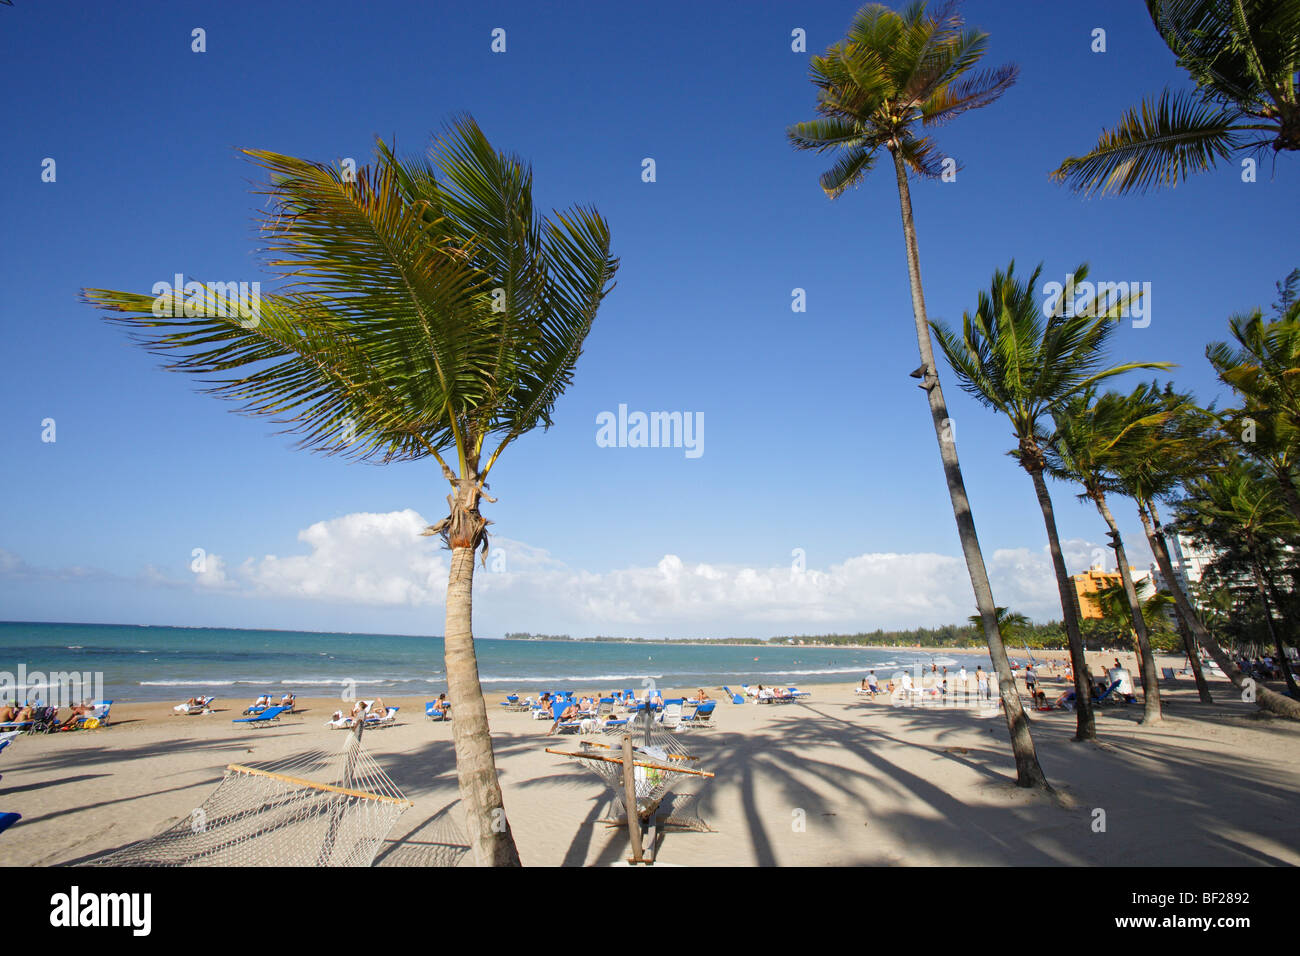 People and palm trees at the beach under blue sky, Isla Verde, Puerto Rico, Carribean, America Stock Photo